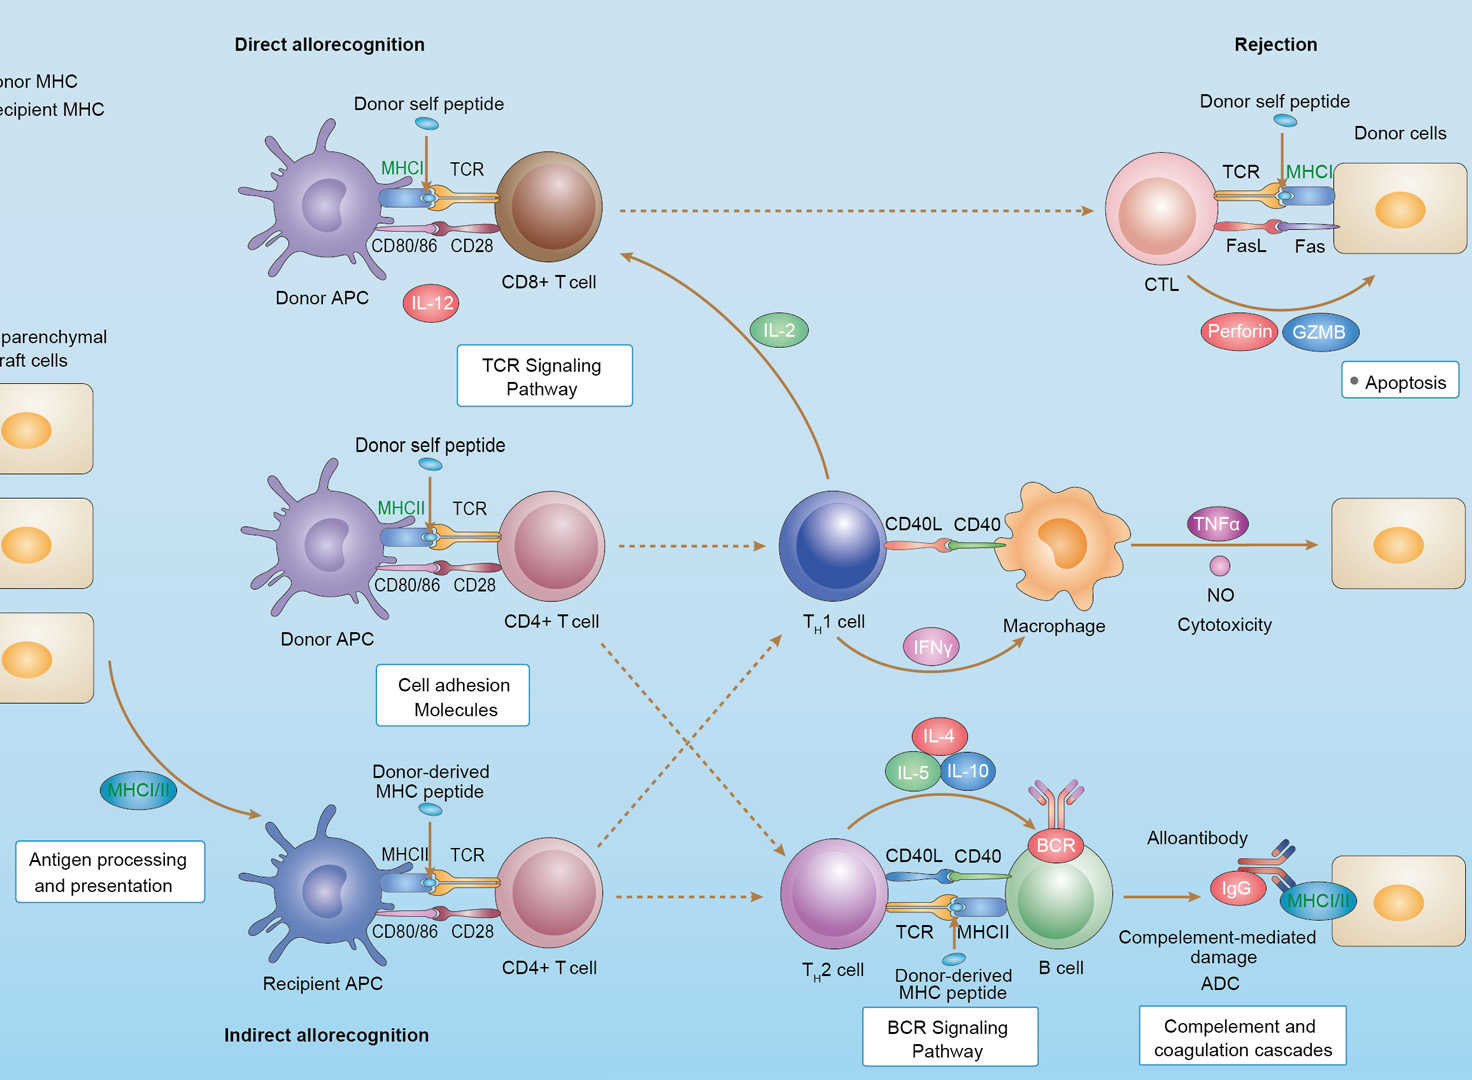 Allograft Rejection Overview - Pathways, Diagnosis, Targeted Therapies